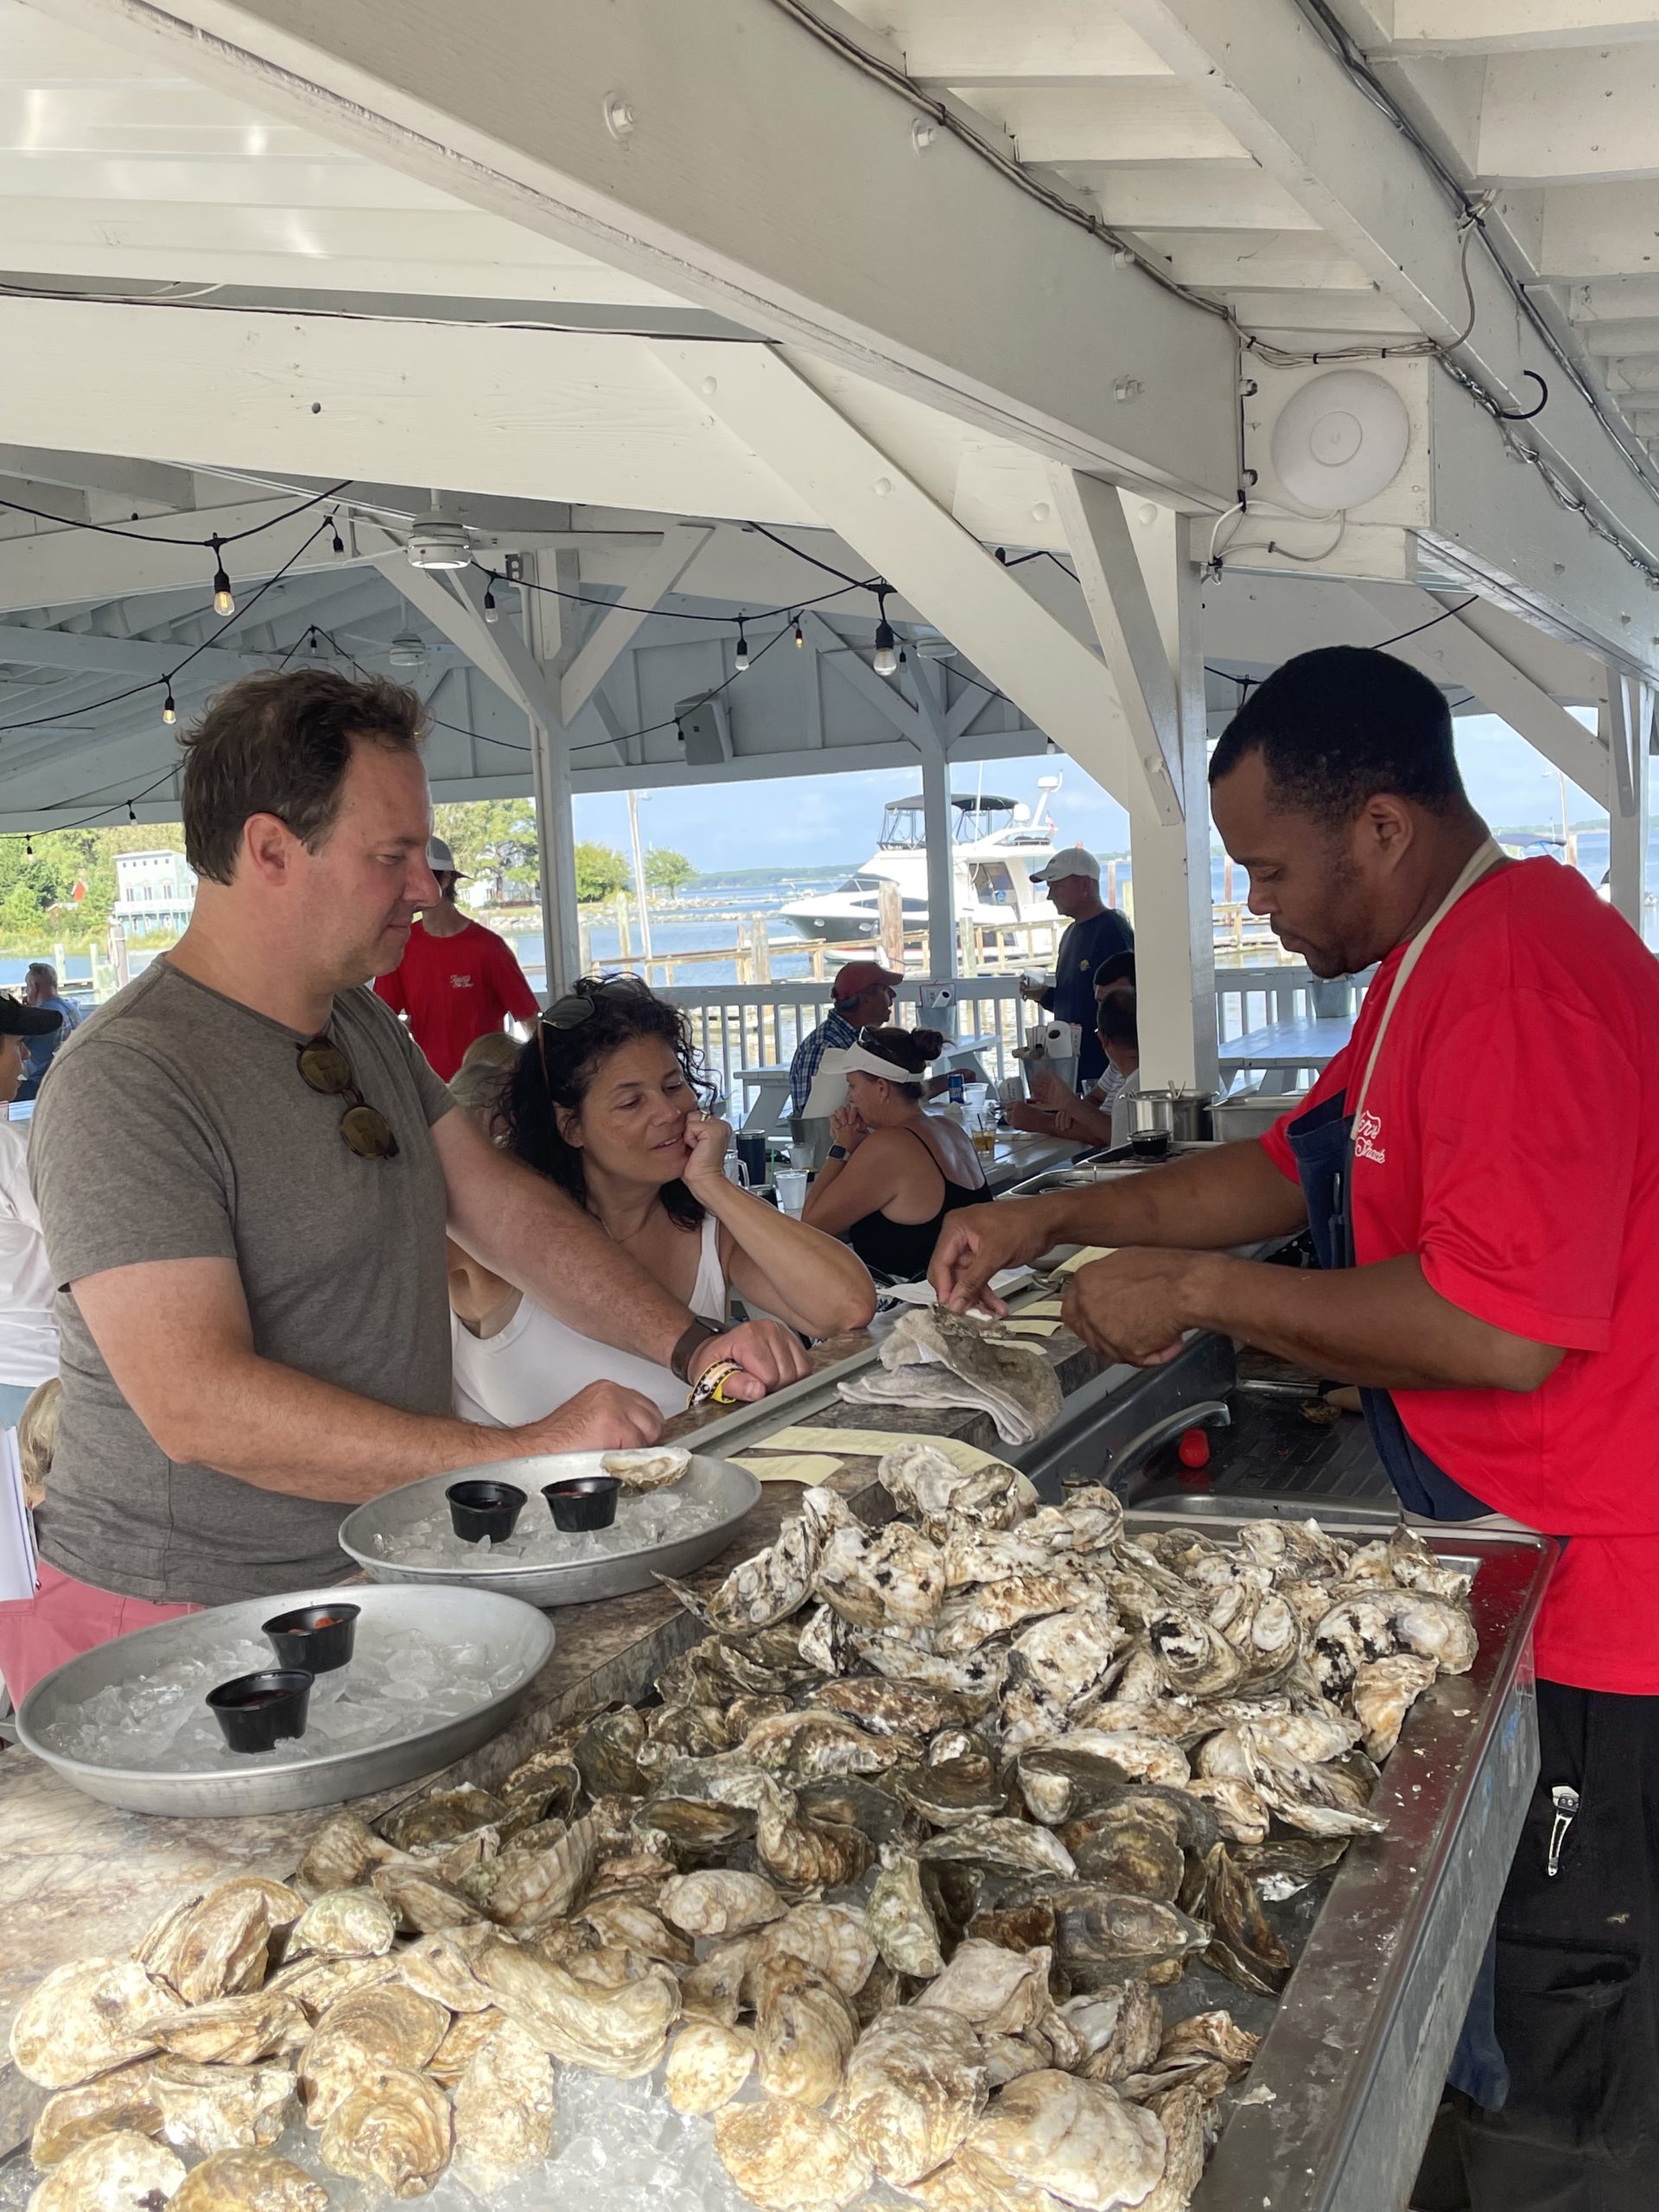 Build Reefs, Get a Taste at "Oyster Restore Afternoons"